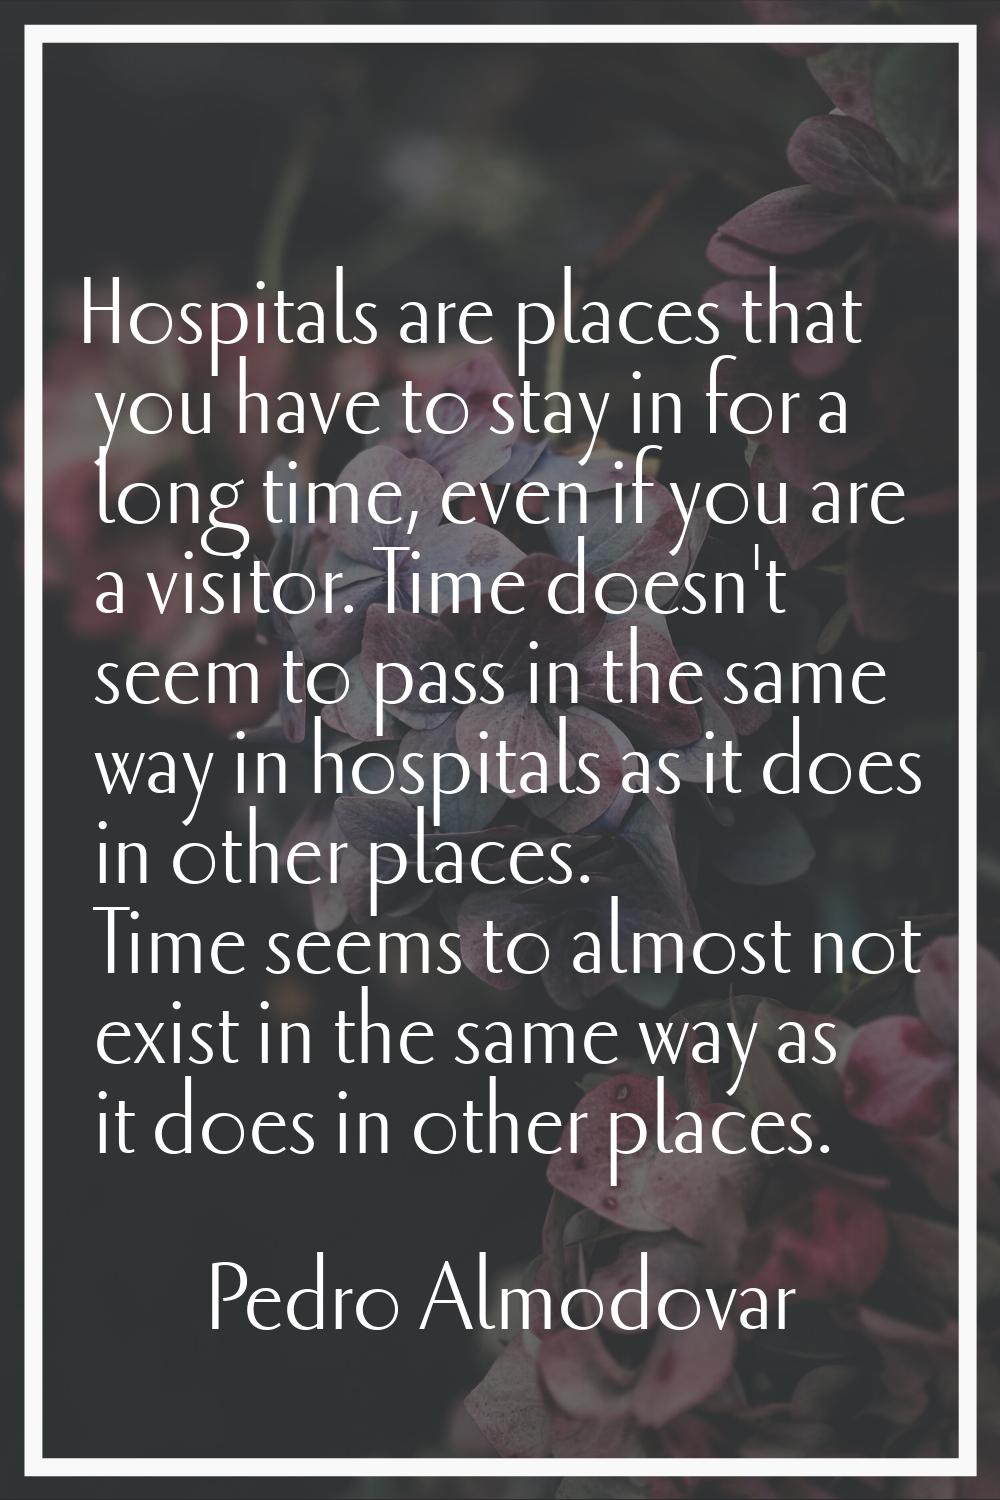 Hospitals are places that you have to stay in for a long time, even if you are a visitor. Time does